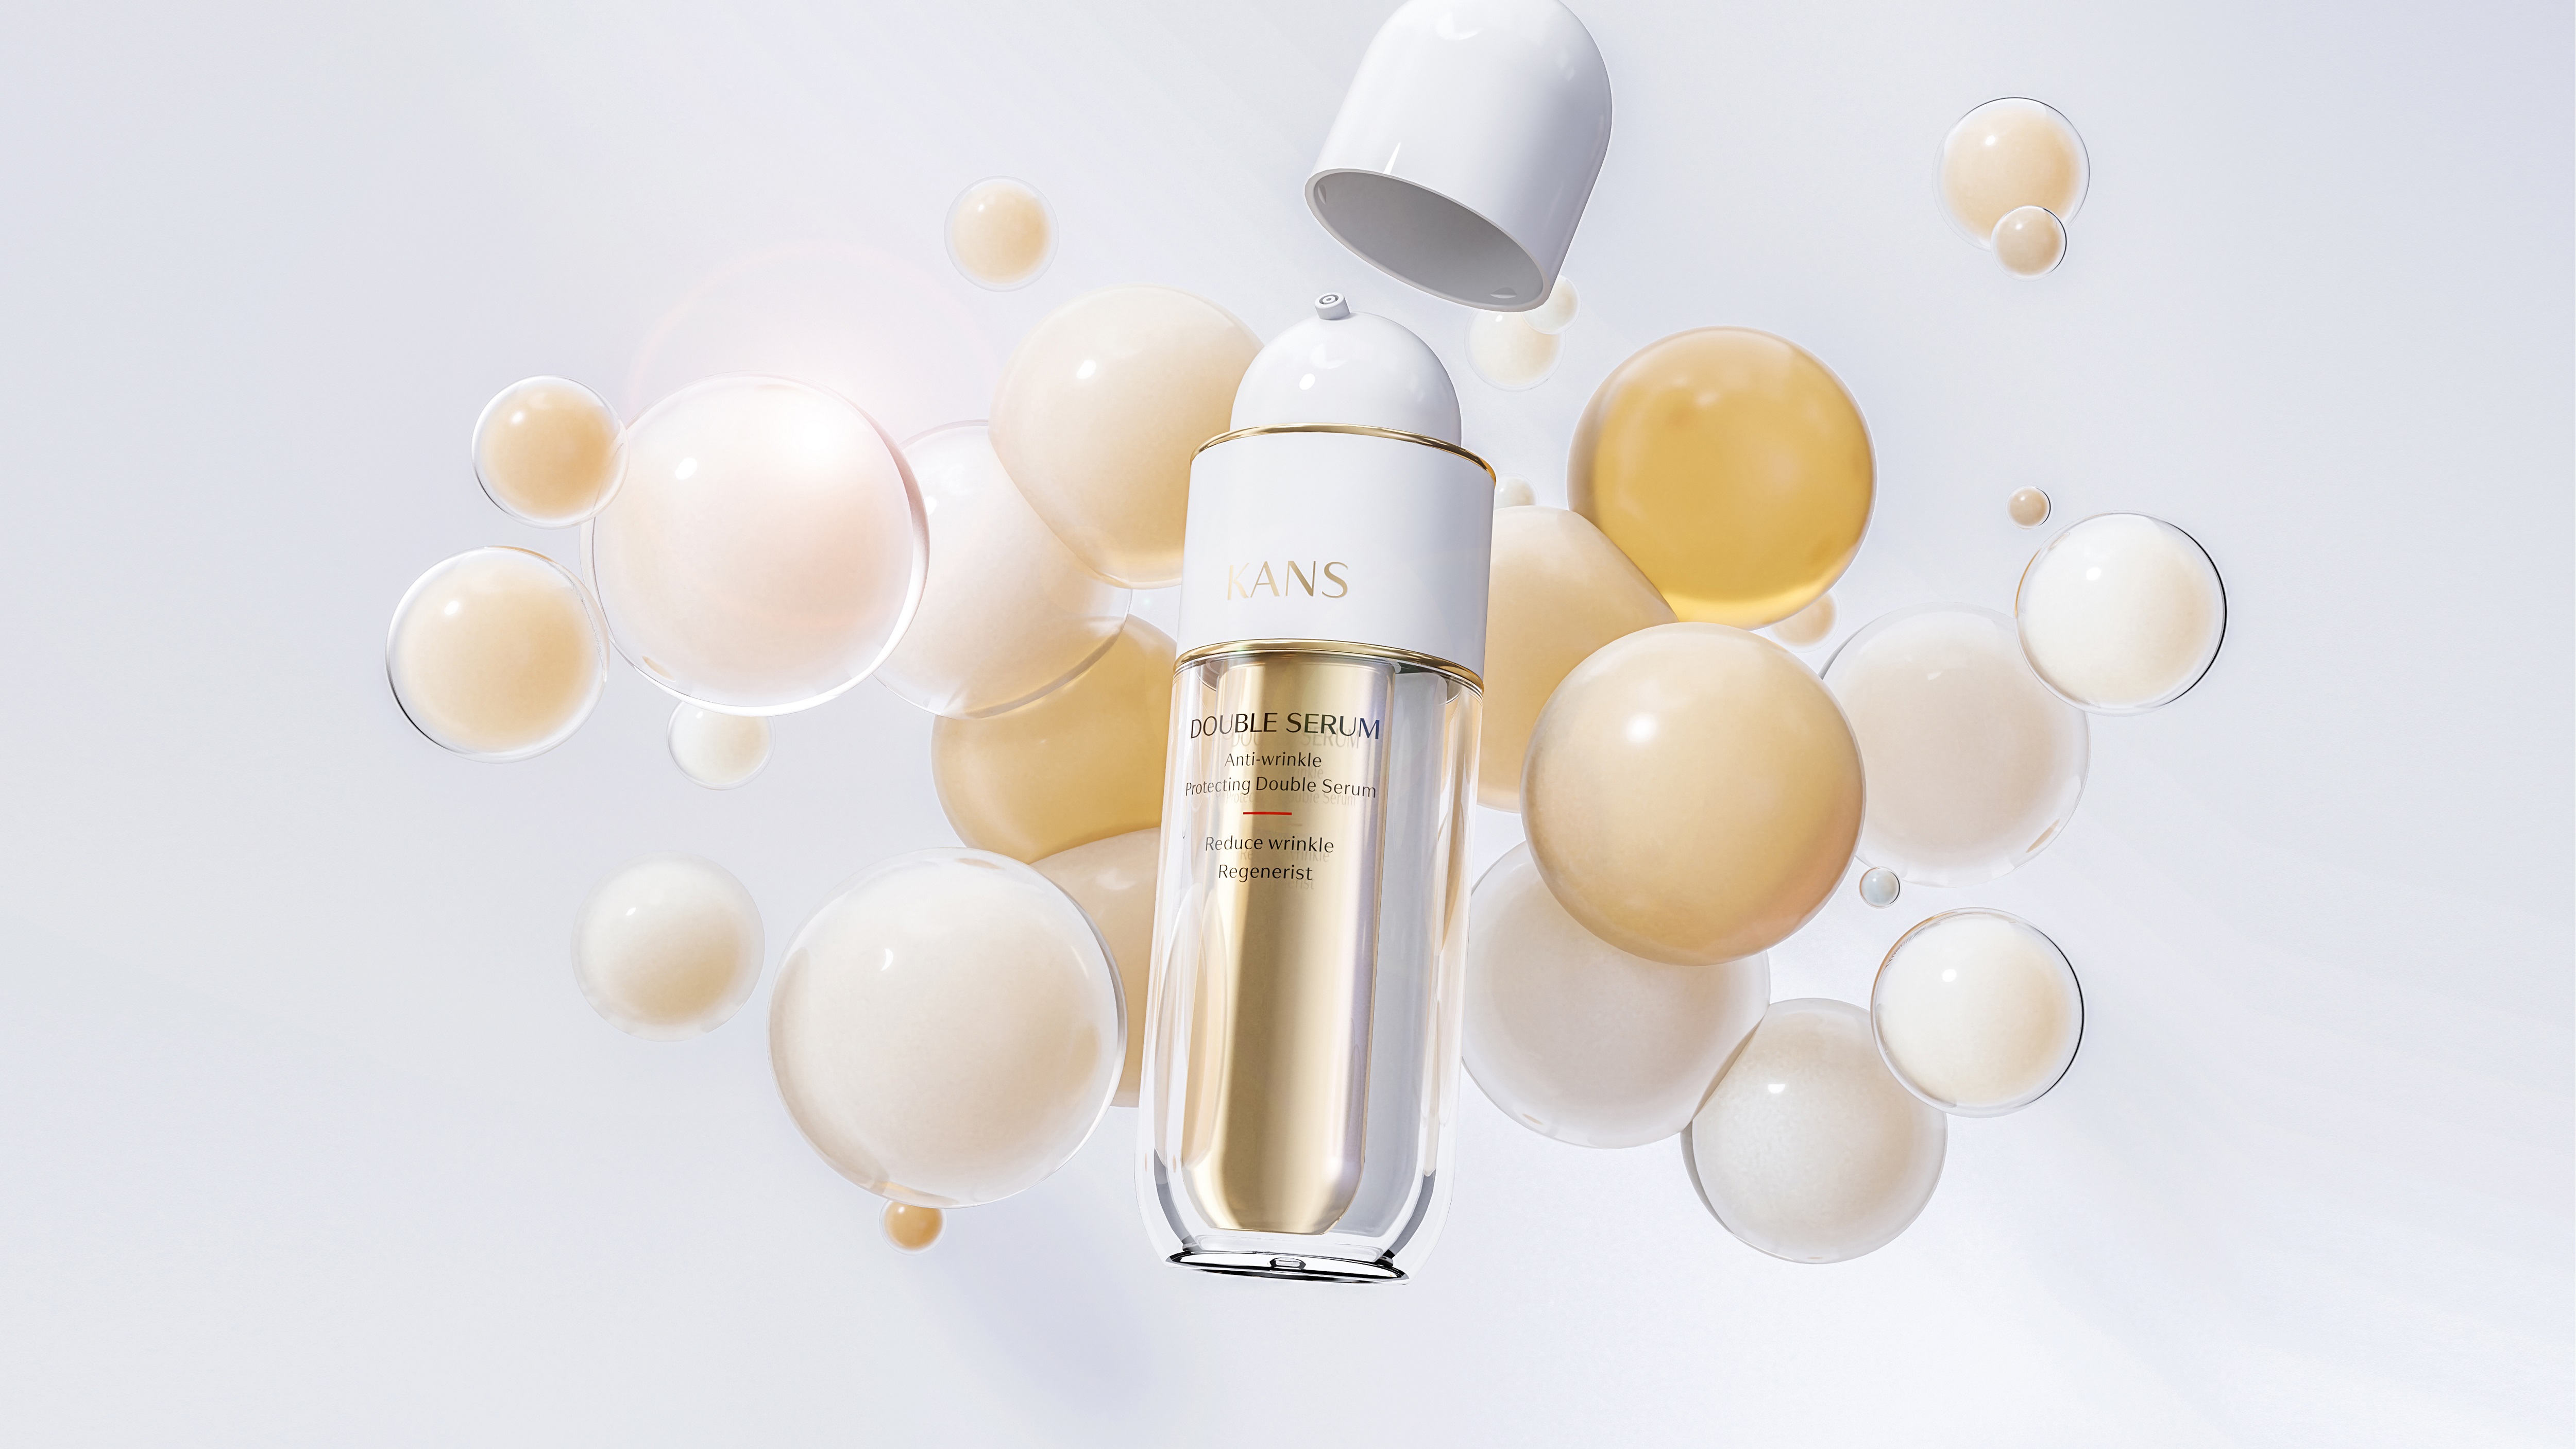 ANTI-WRINKLE PROTECTING DOUBLE SERUM OF KANS